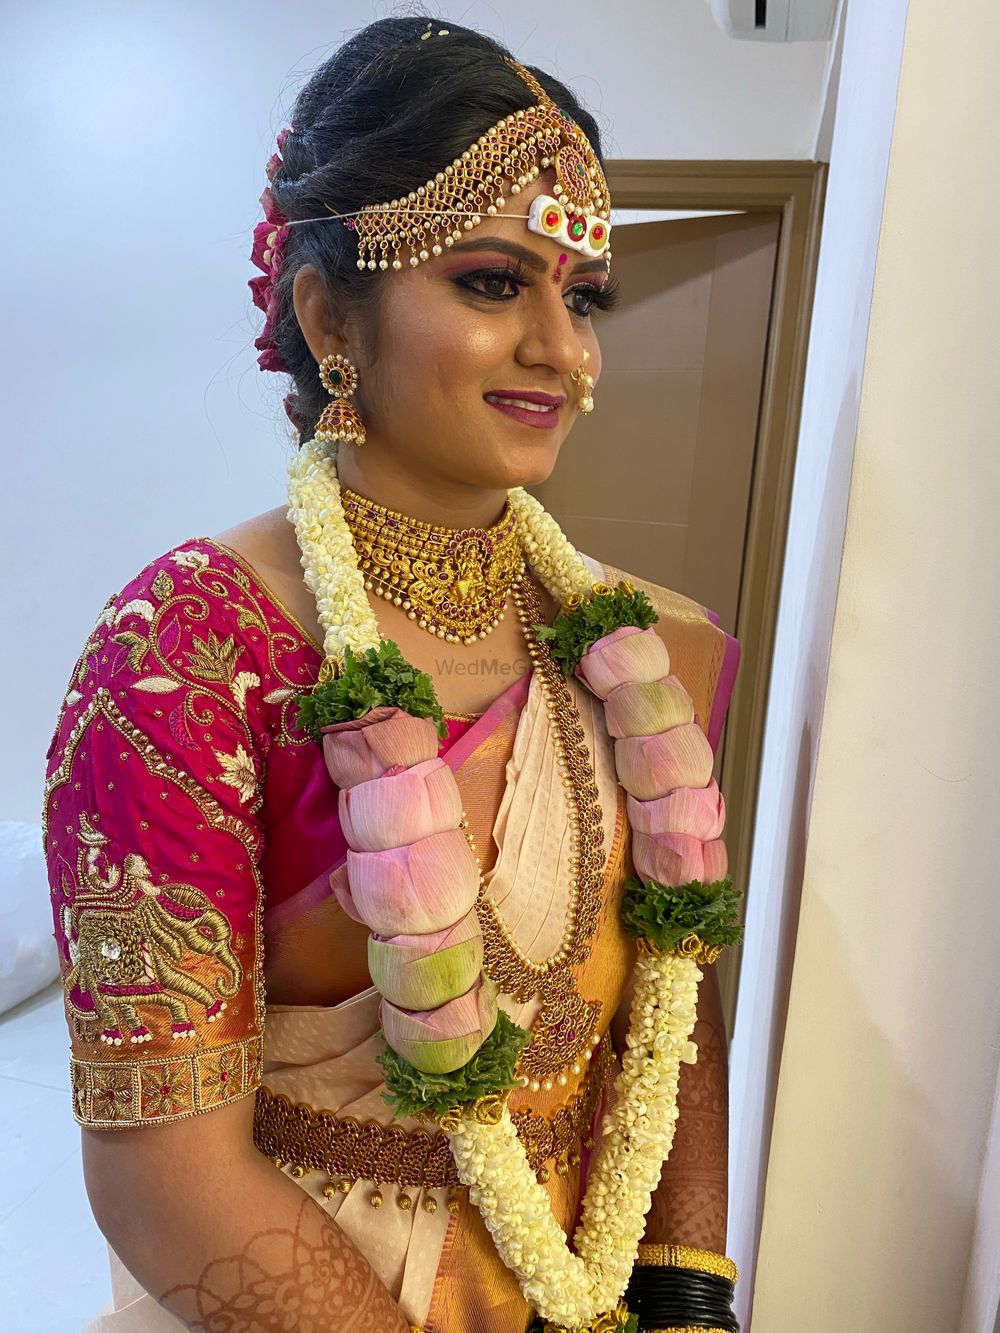 Photo By Makeup by Pavithra - Bridal Makeup